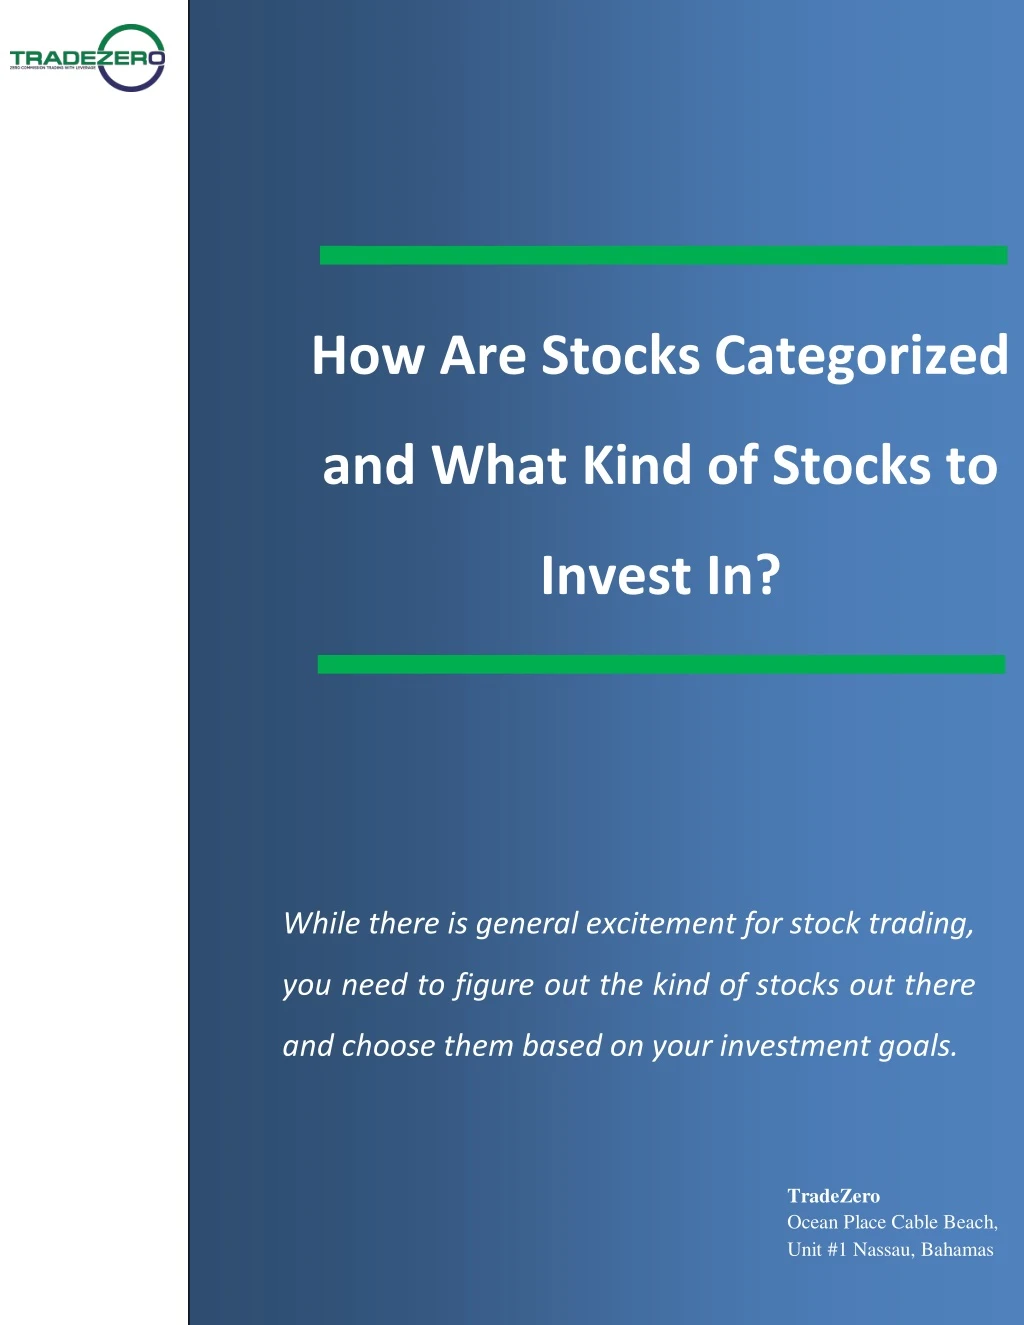 how are stocks categorized